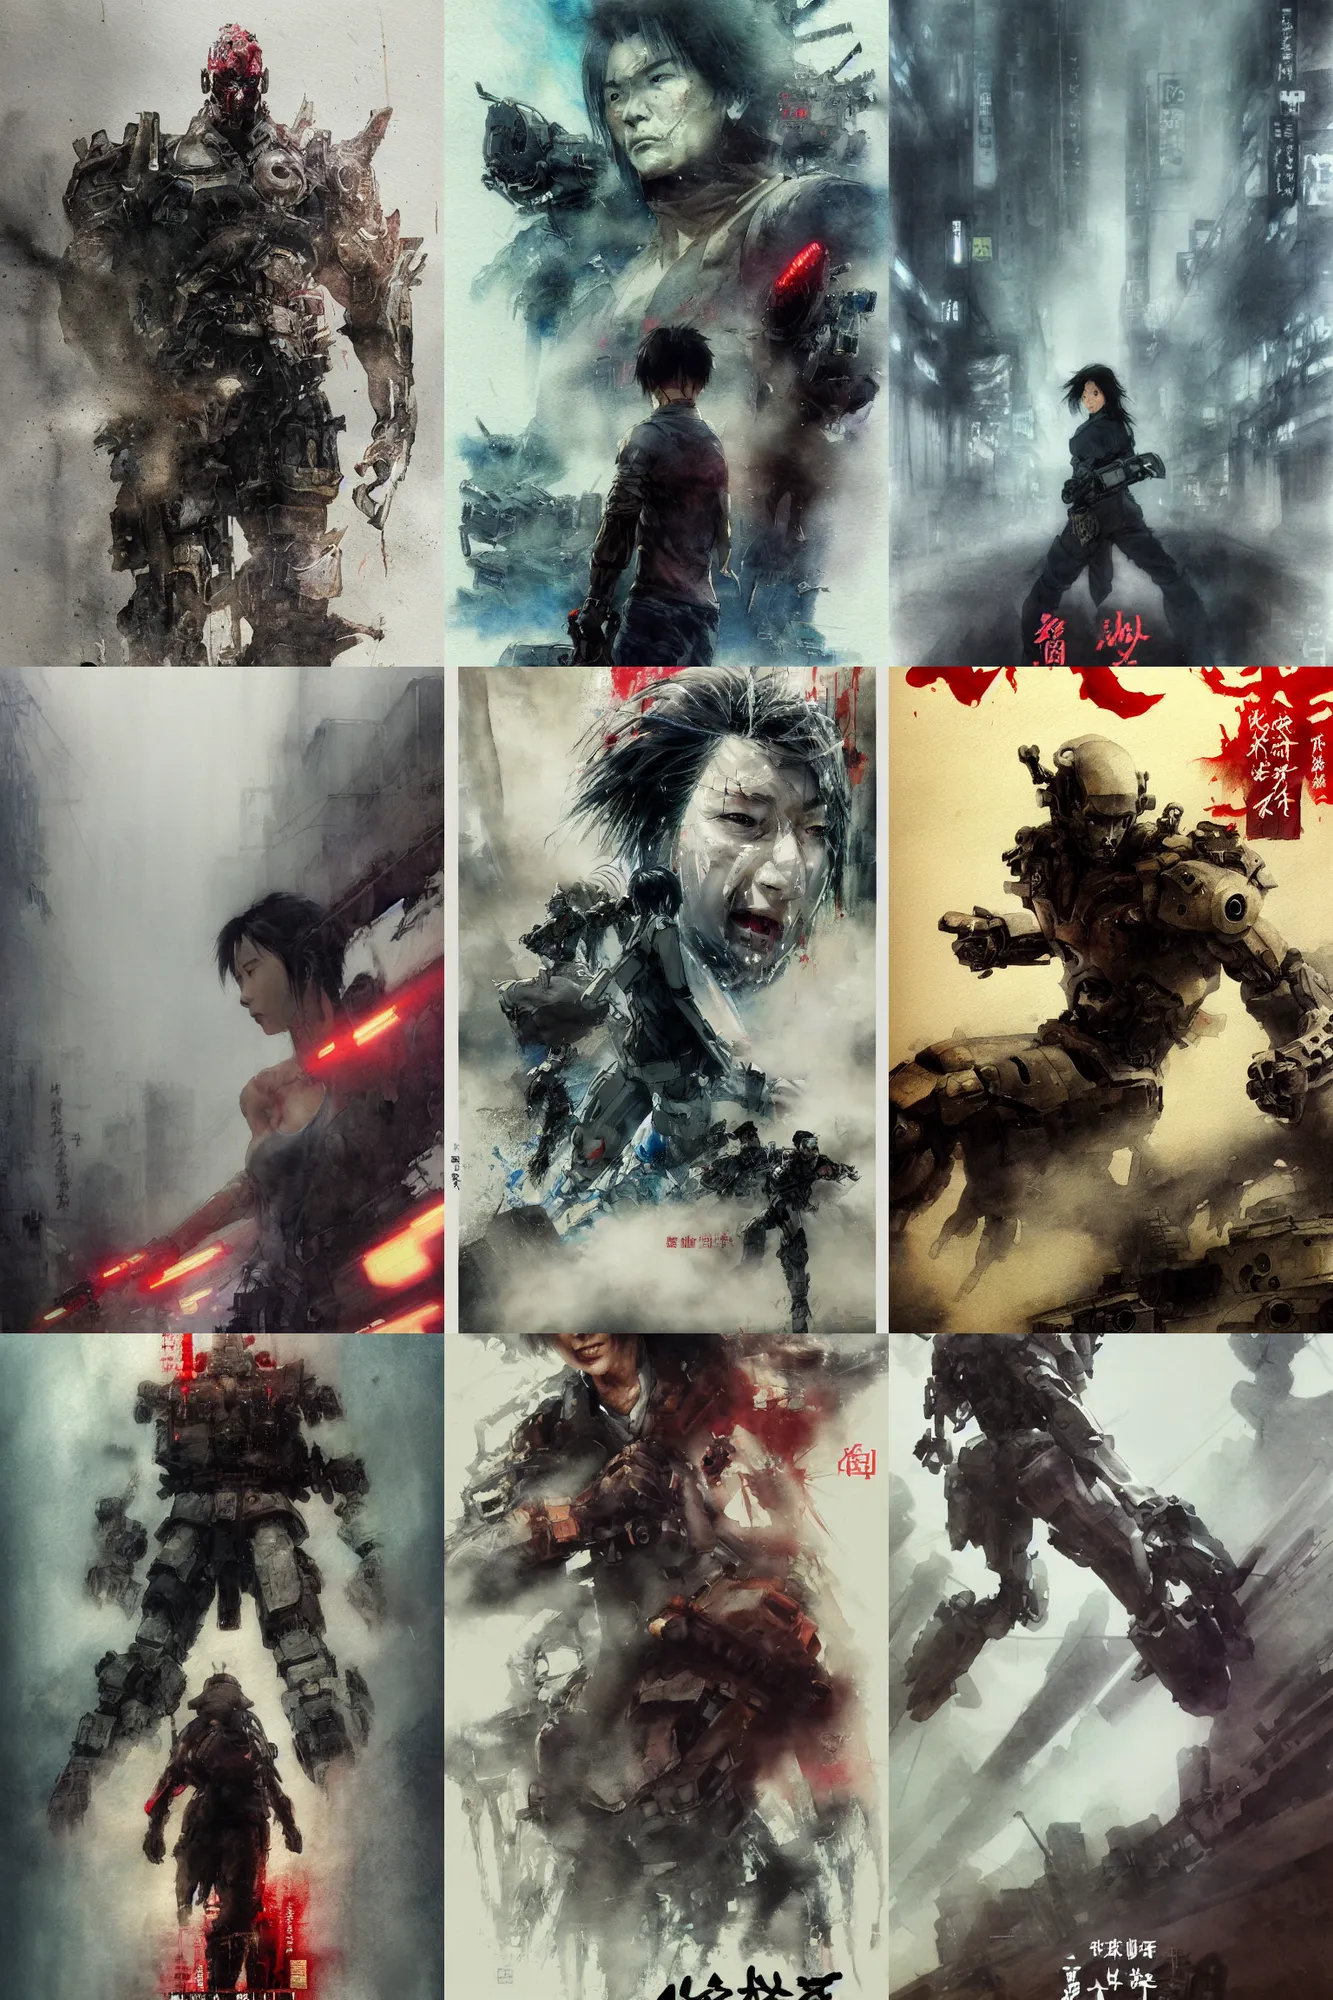 Prompt: incredible ruan jia movie poster, painted ,masterful detailed watercolor, japan, anime face, yoji shinkawa, kastuhiro otomo, kaiju broken robot limbs claw at the the fog in the background, foggy, light rain, sparks, movie scene close up emotional miss Kusanagi face, short bob hair, wet highway chase, brown mud, dust, robot arm, emotional face shot ,light rain, glowing japanese advertisements on buildings, hd, 4k, remaster, dynamic camera angle, deep 3 point perspective, fish eye, dynamic scene